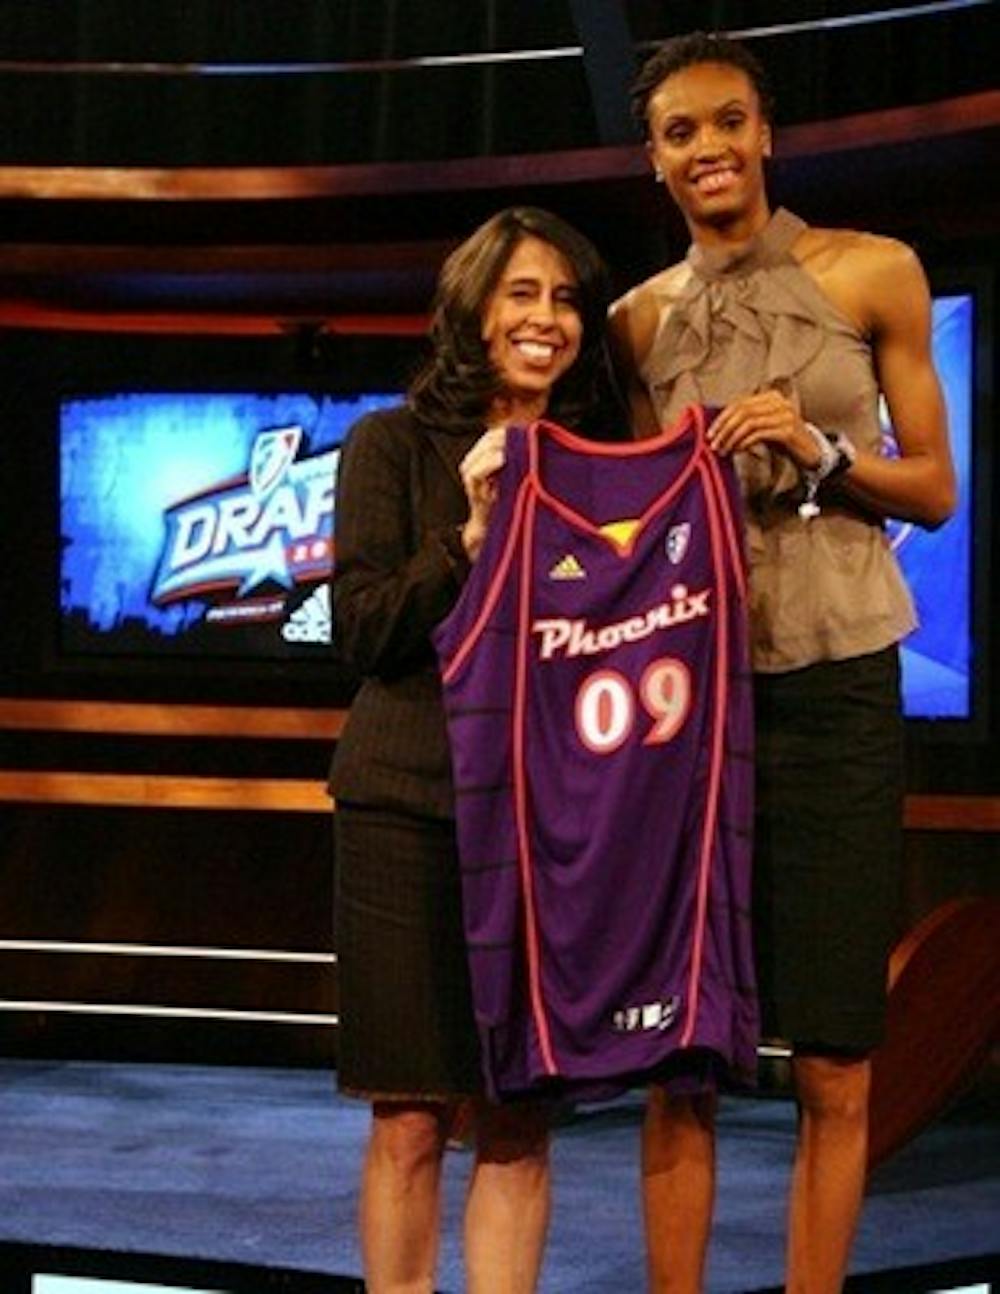 WNBA Commissioner Donna Orender poses with DeWanna Bonner after being drafted No. 5 overall by the Phoenix Mercury during the 2009 WNBA Draft Thursday in Secaucus, New Jersey. Copyright 2009 NBAE  (Photo by Nathaniel S. Butler/NBAE/Getty Images) DeWanna Bonner; Donna Orender.